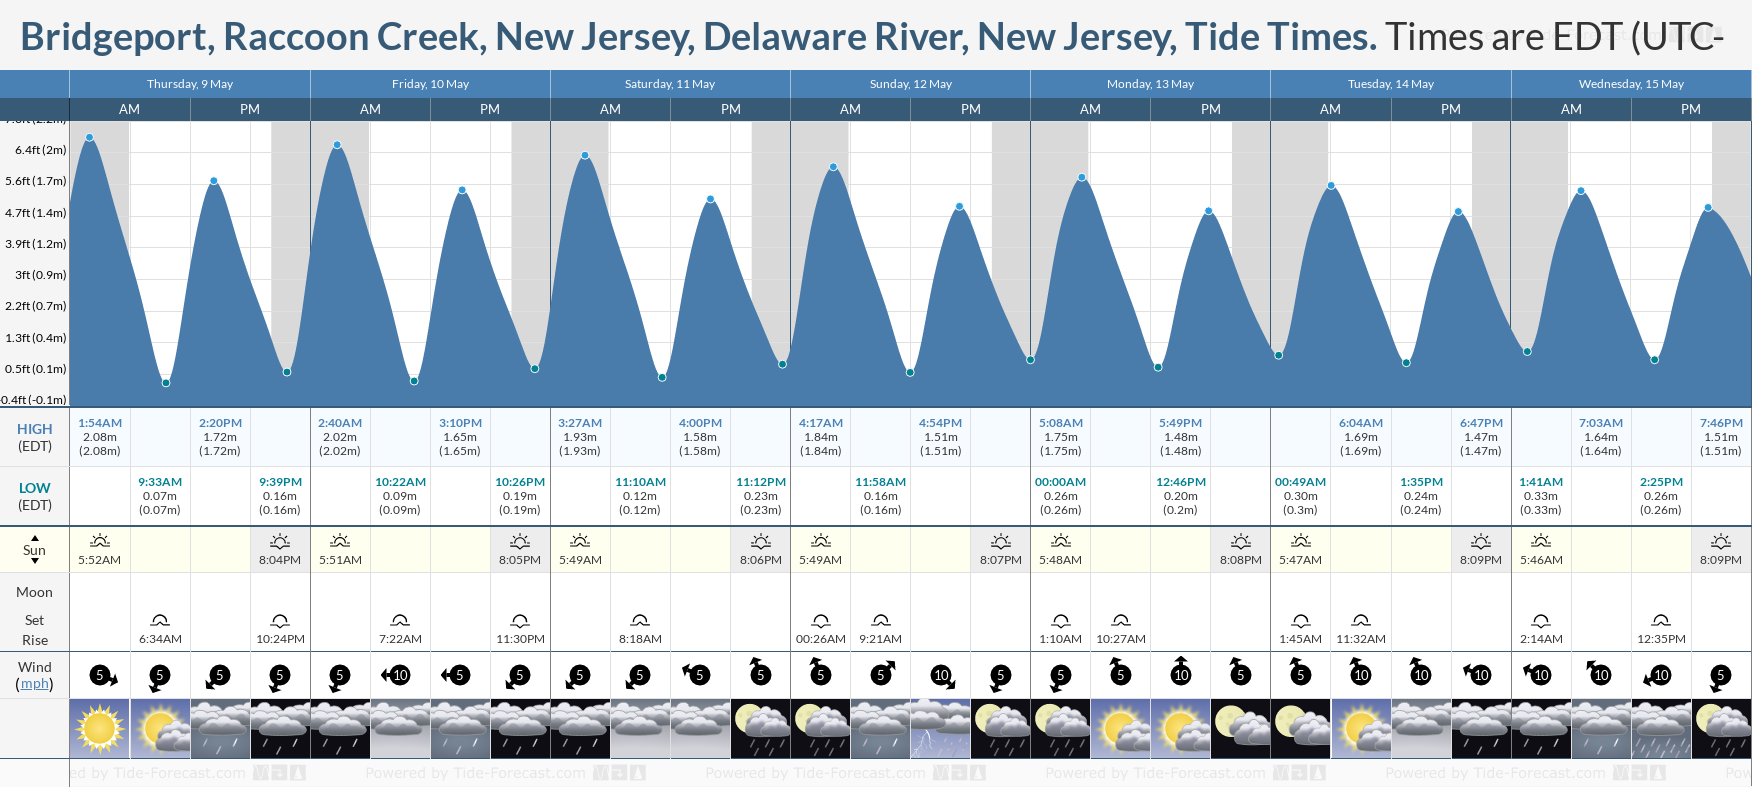 Bridgeport, Raccoon Creek, New Jersey, Delaware River, New Jersey Tide Chart including high and low tide tide times for the next 7 days